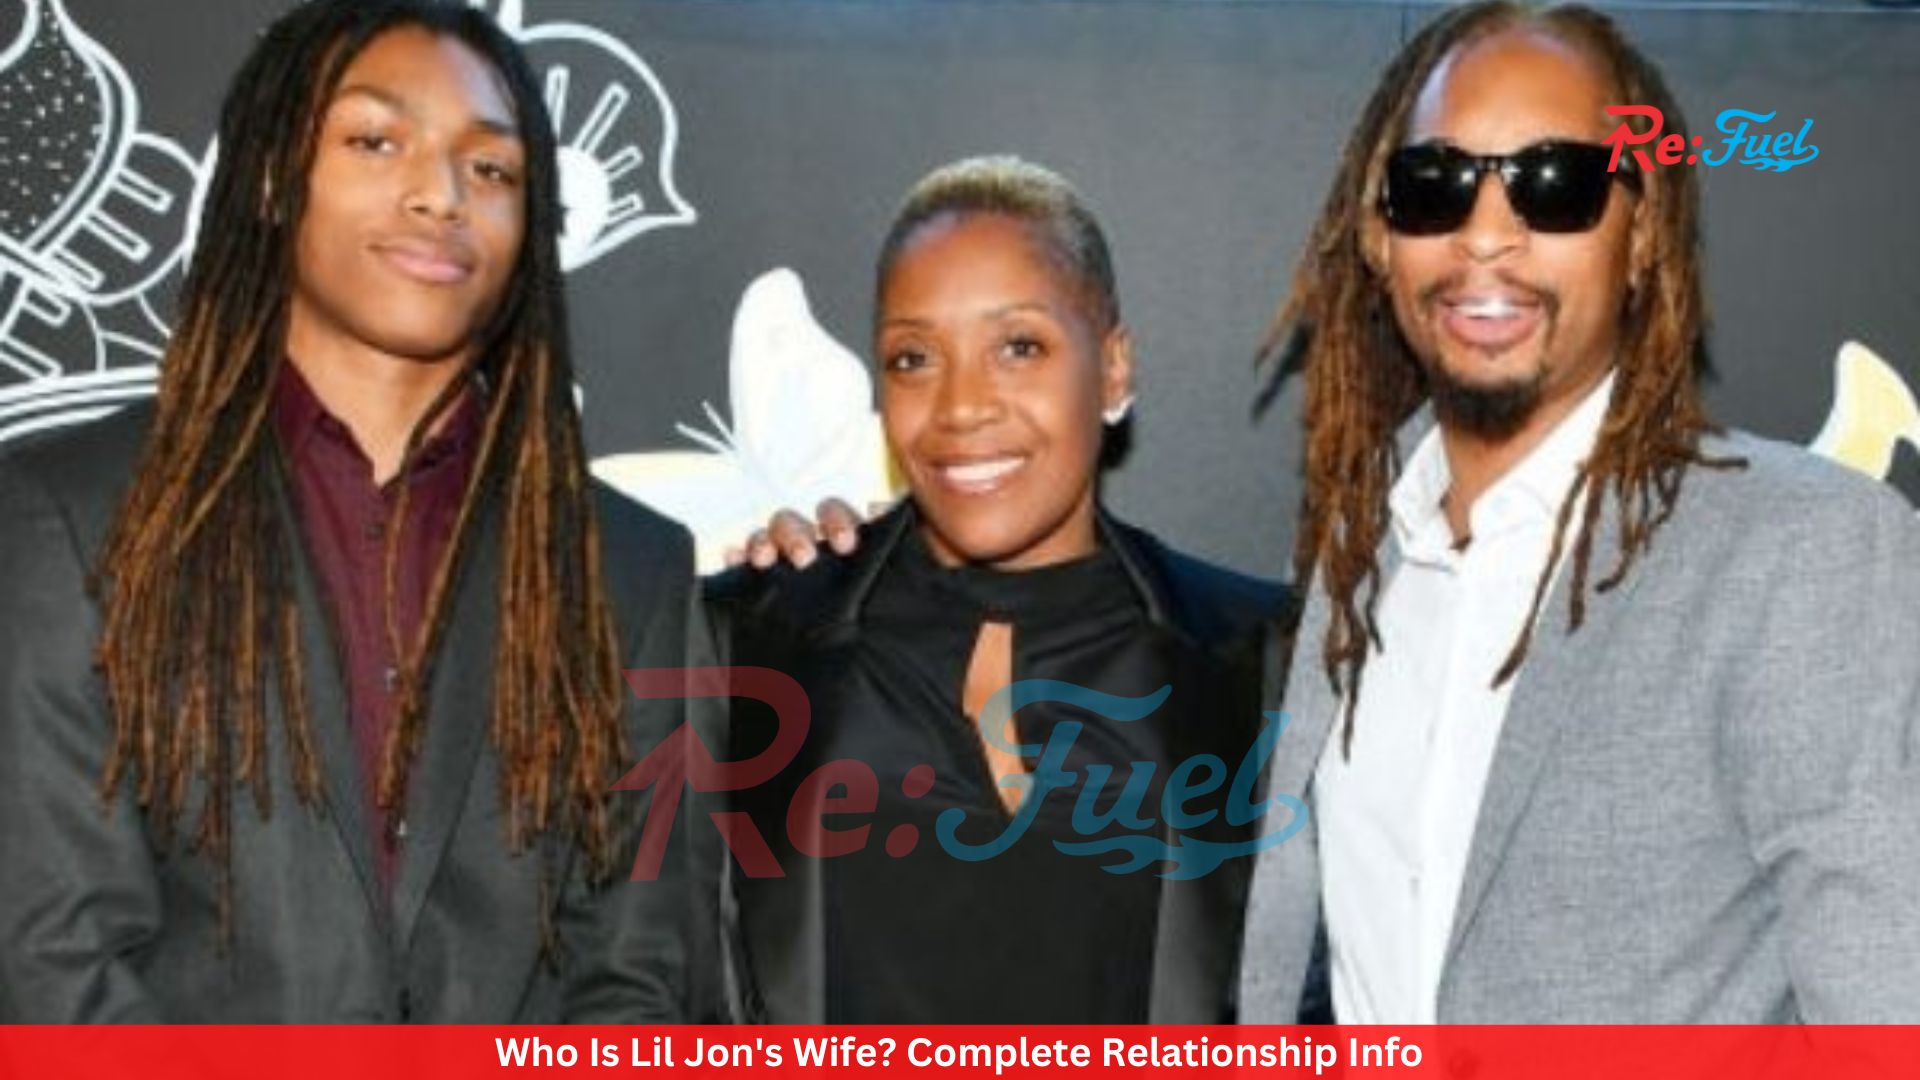 Who Is Lil Jon's Wife? Complete Relationship Info